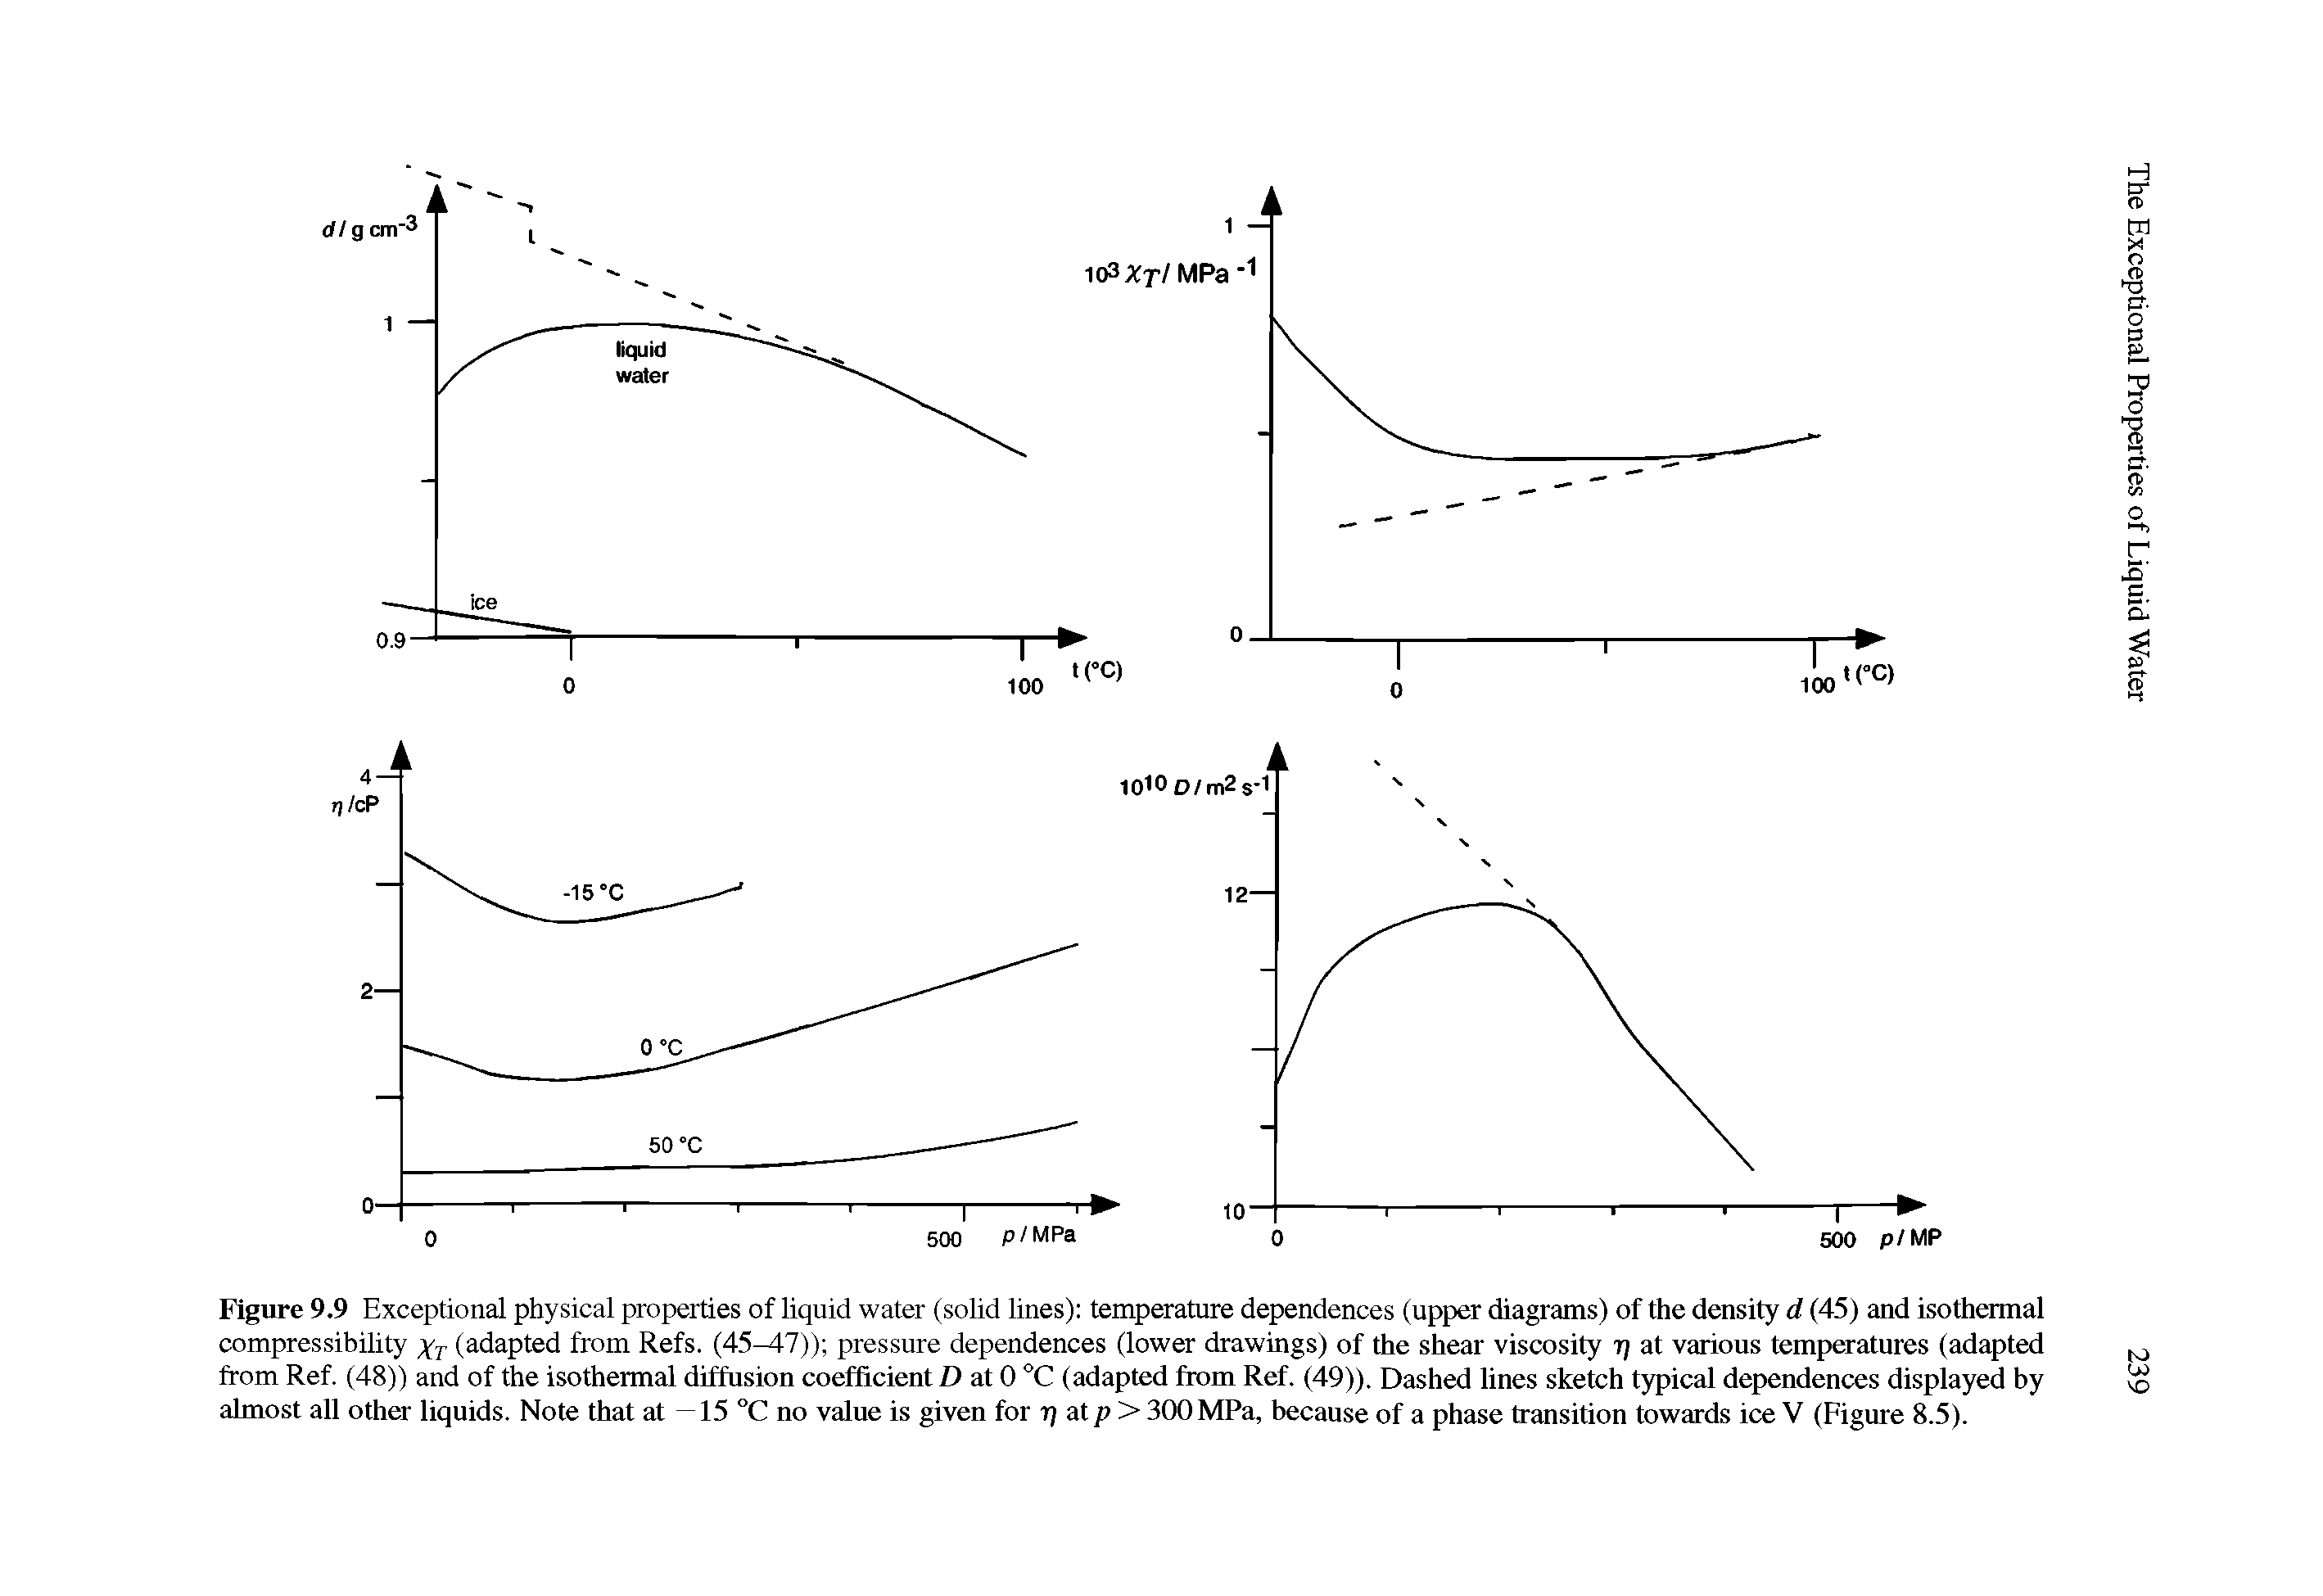 Figure 9.9 Exceptional physical properties of liquid water (solid lines) temperature dependences (upper diagrams) of the density d (45) and isothermal compressibility Xt (adapted from Refs. (45 7)) pressure dependences (lower drawings) of the shear viscosity 7] at various temperatures (adapted from Ref. (48)) and of the isothermal diffusion coefficient Z) at 0 (adapted from Ref. (49)). Dashed lines sketch typical dependences displayed by almost all other liquids. Note that at —15 °C no value is given for 17 at/ > 300MPa, because of a phase transition towards ice V (Figure 8.5).